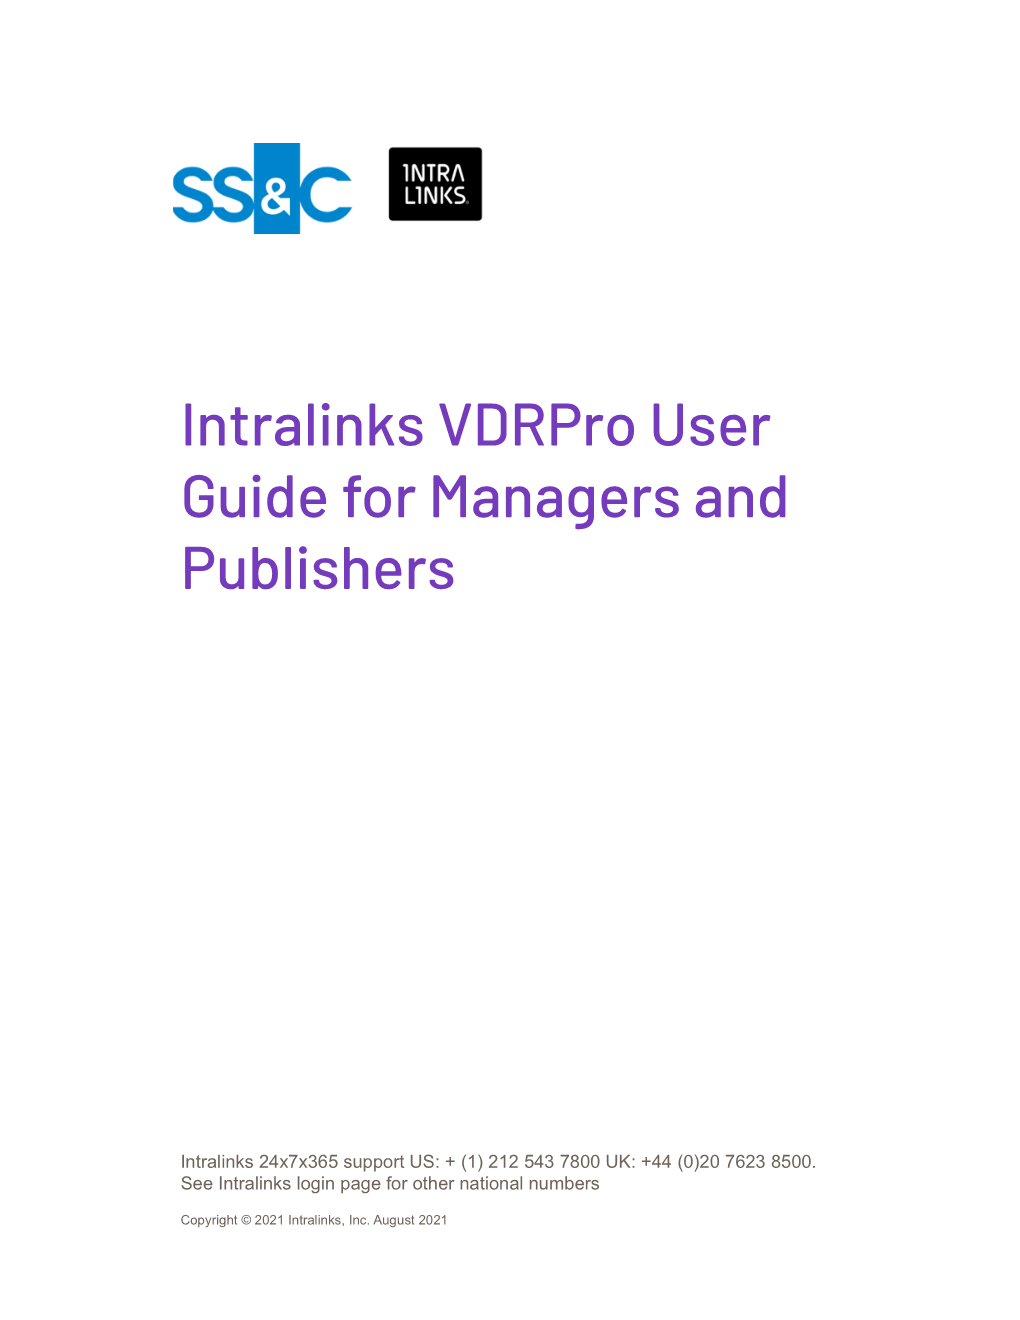 Intralinks Vdrpro User Guide for Managers and Publishers